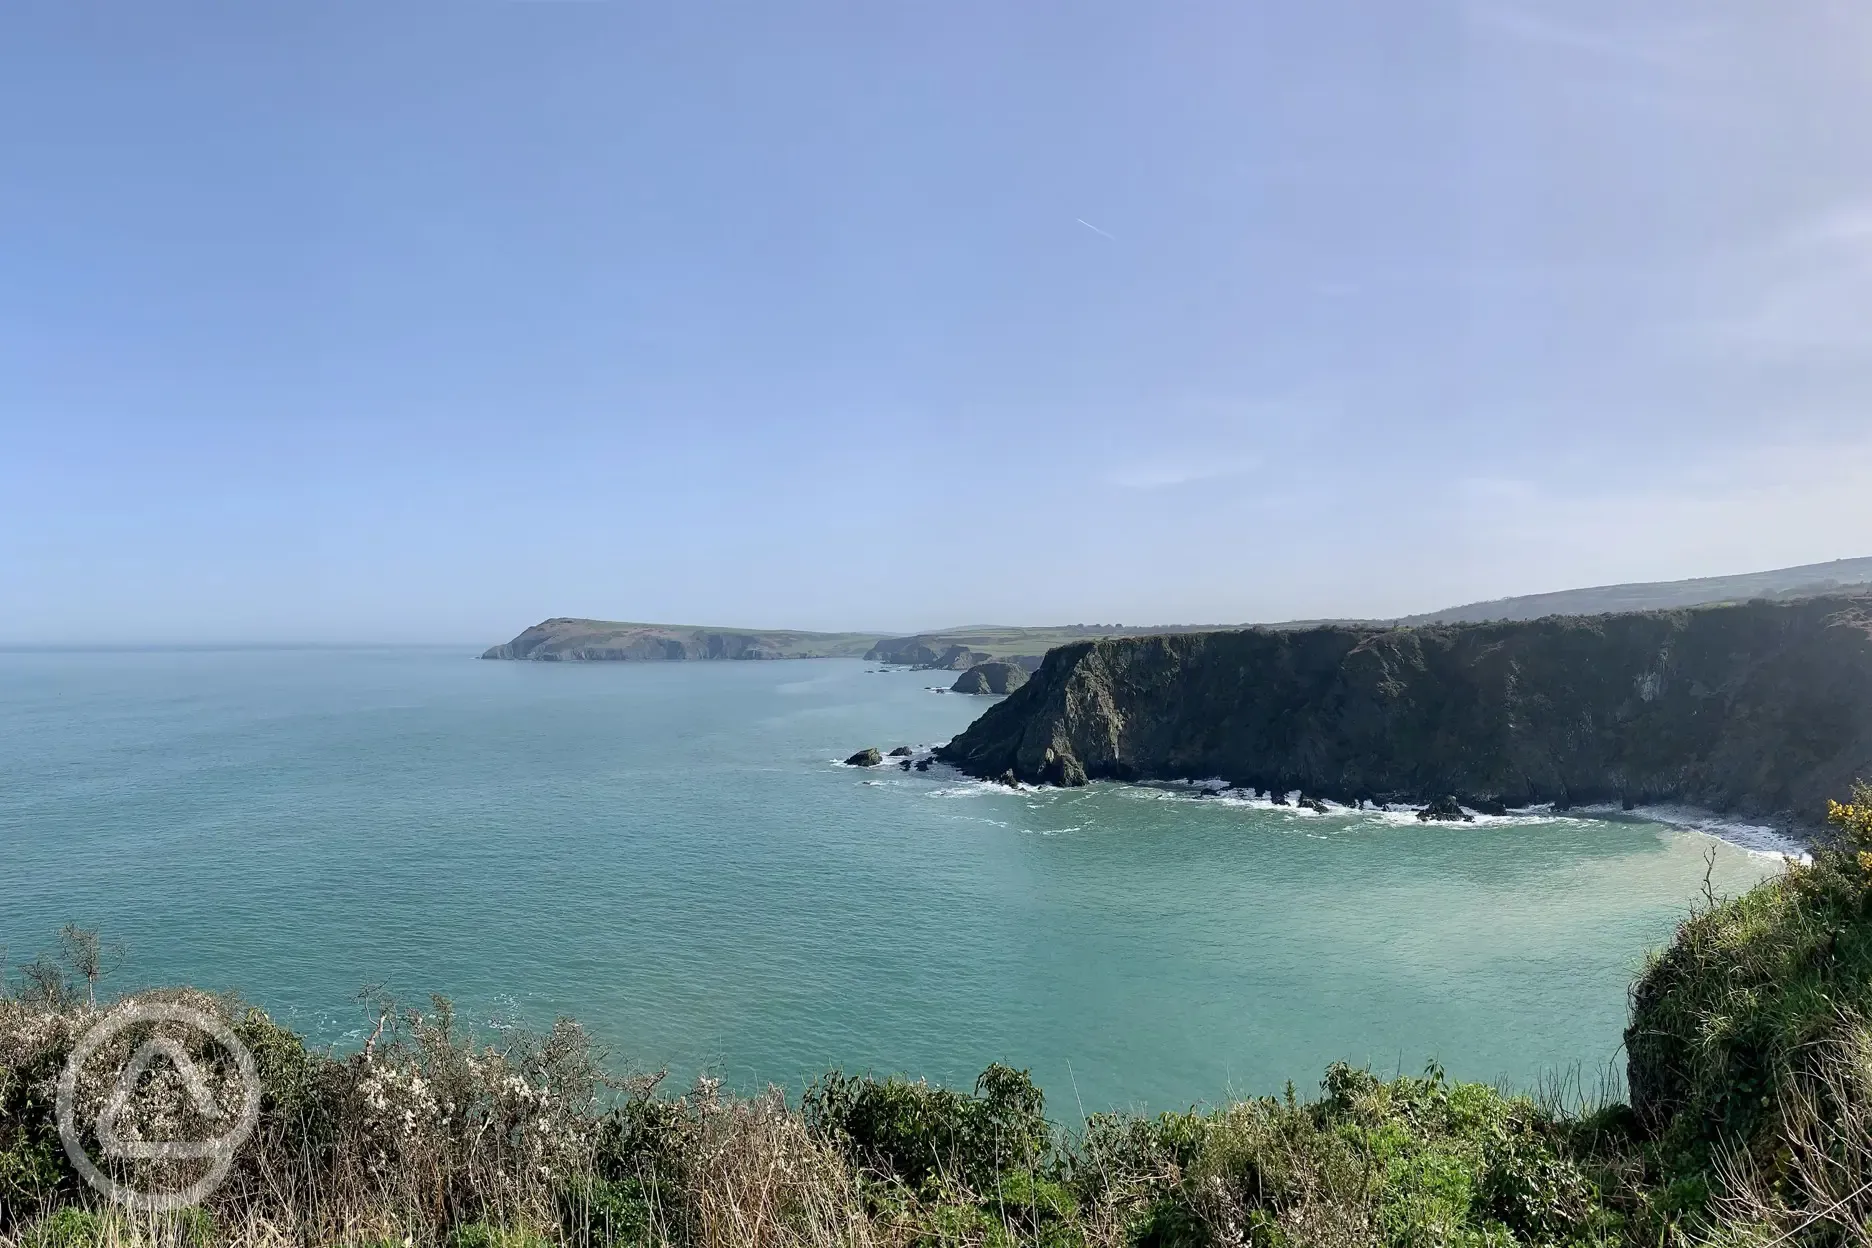 A view from the coastal path walk